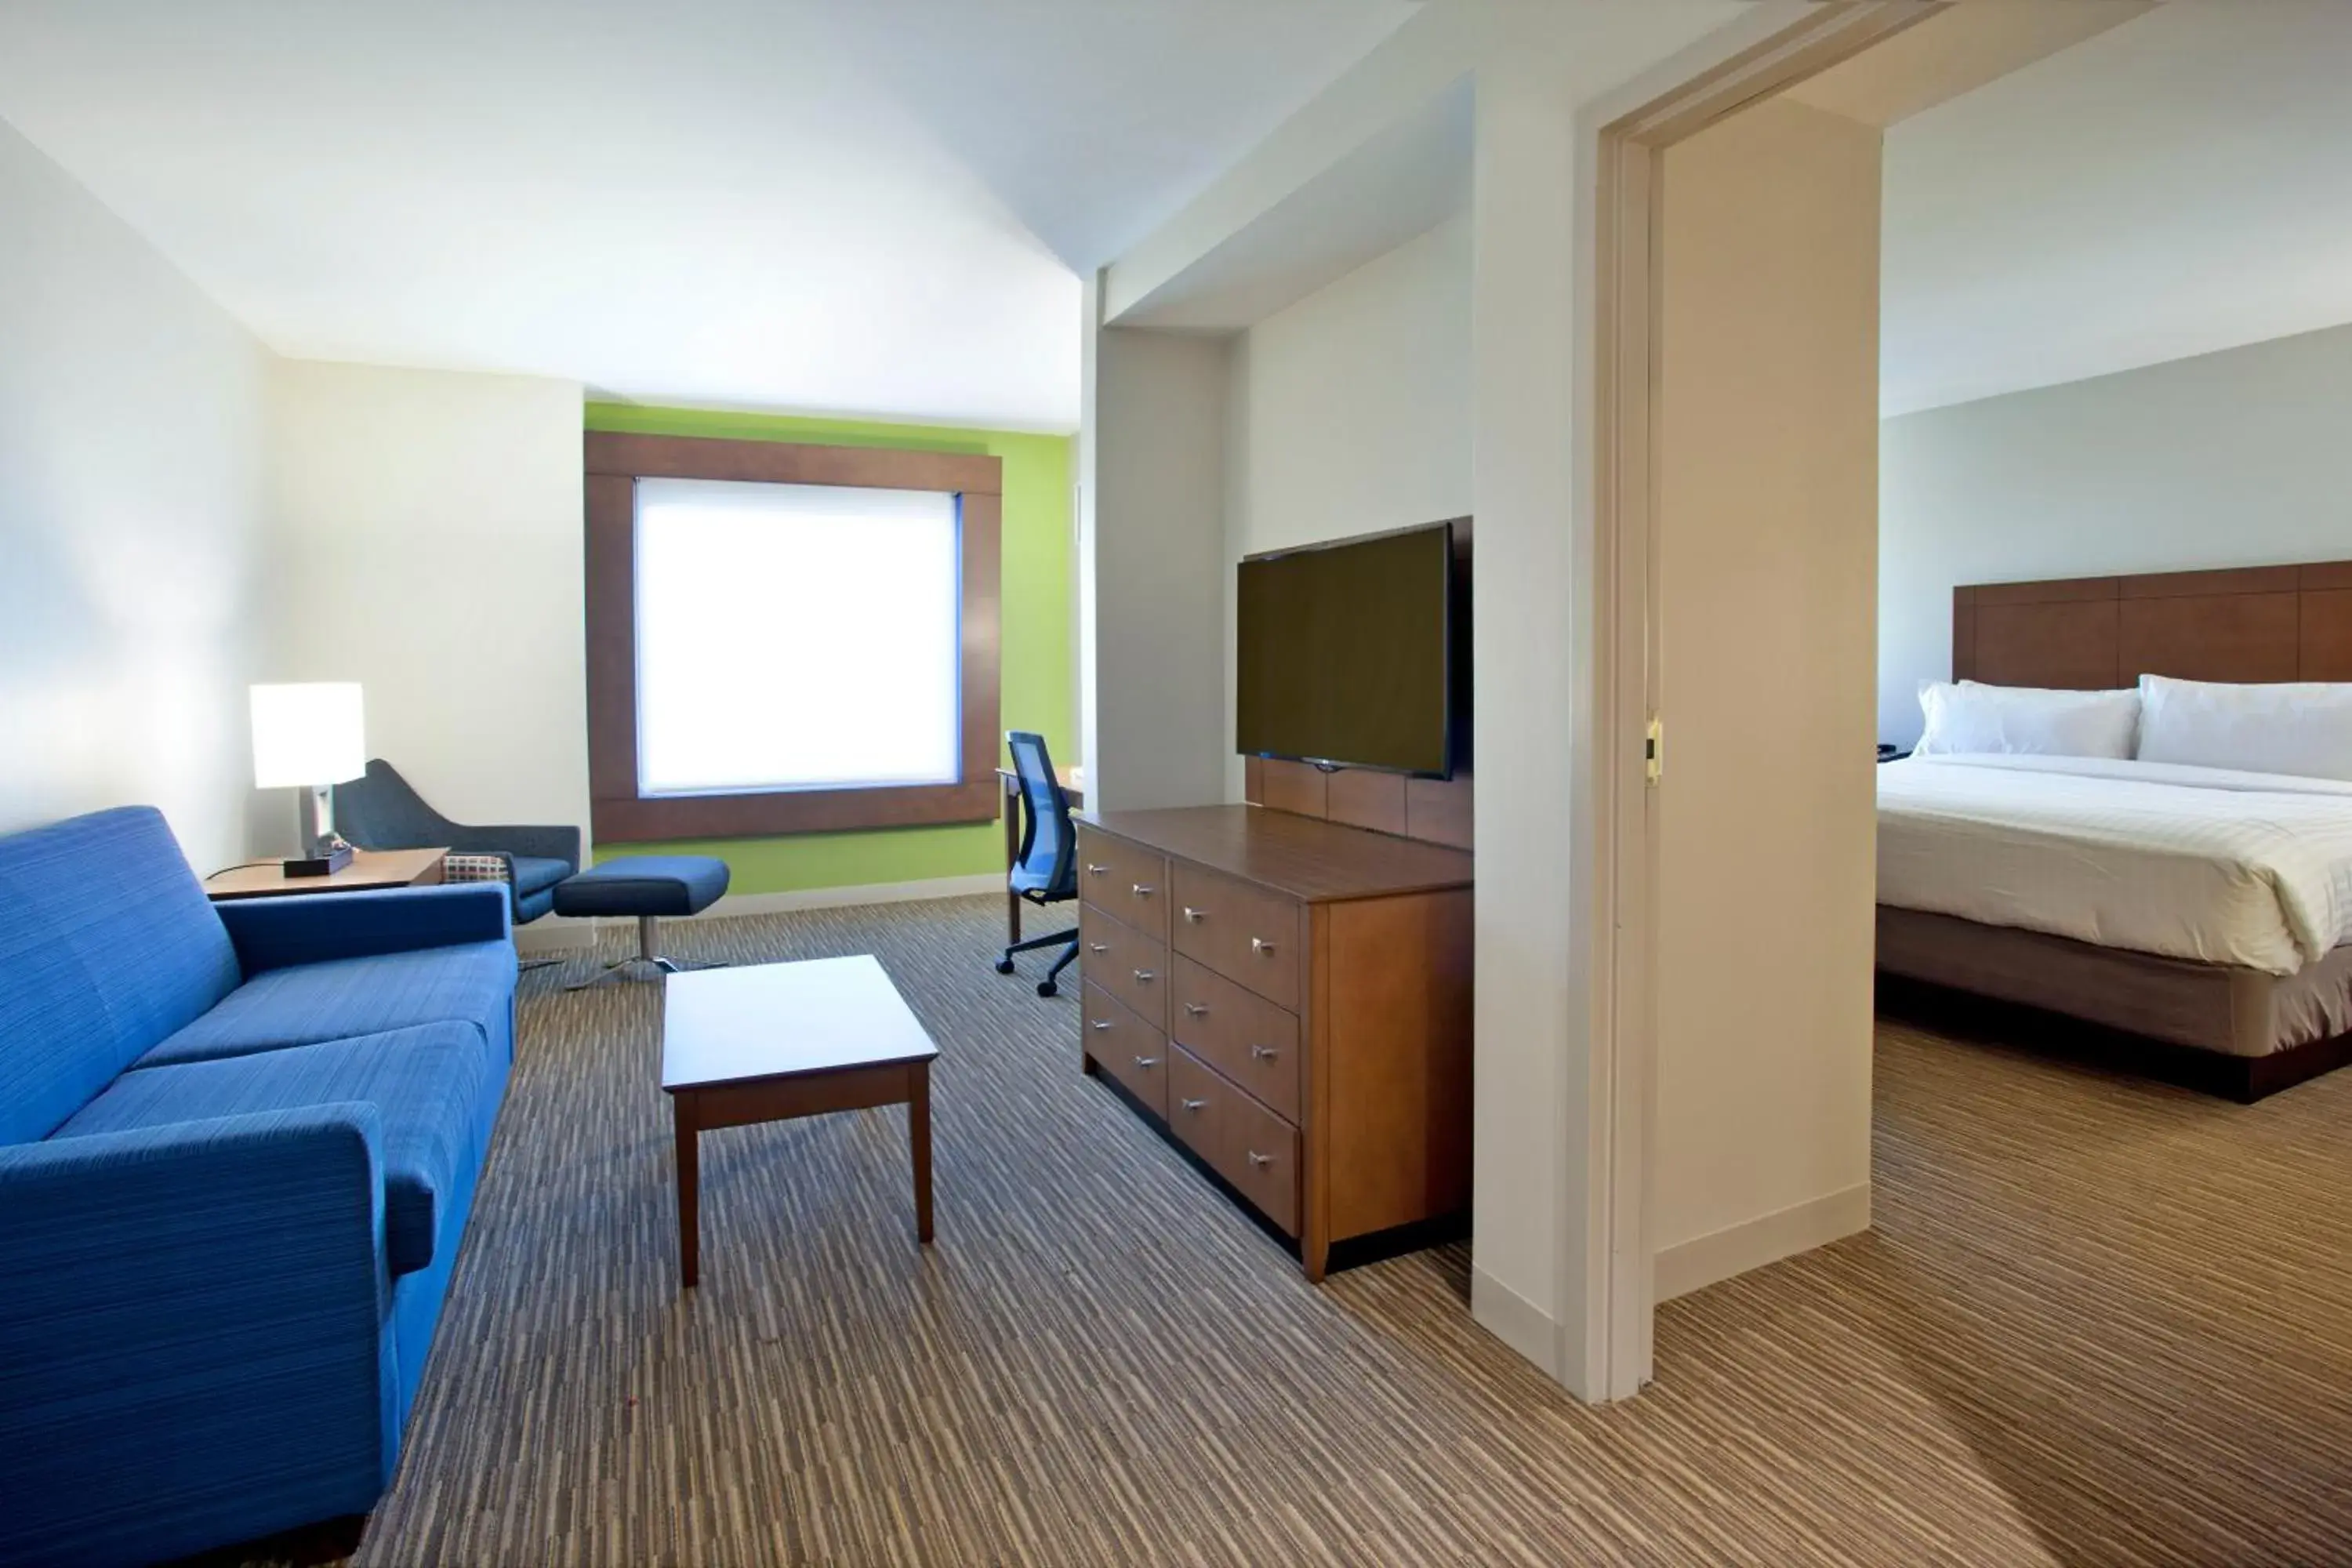 Bed, Room Photo in Holiday Inn Express Hotel & Suites Austin Downtown - University, an IHG Hotel